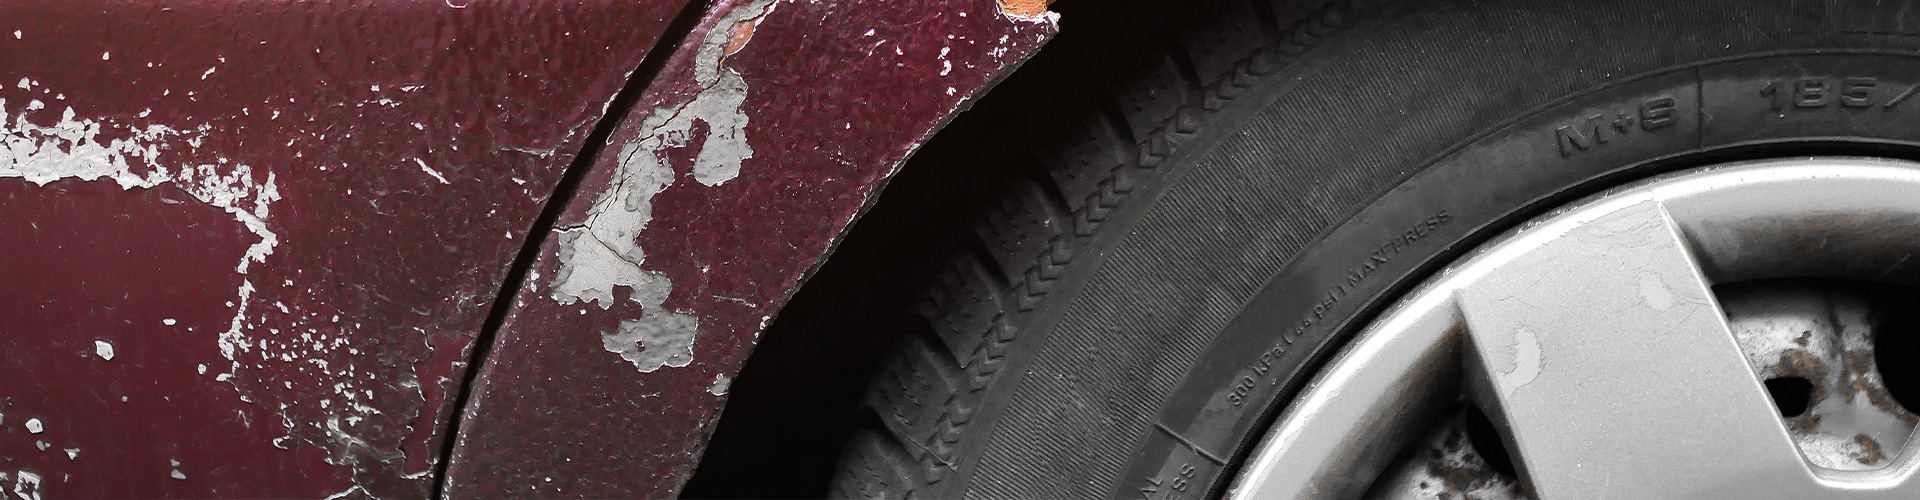 Closeup of the tire and rims of a car.